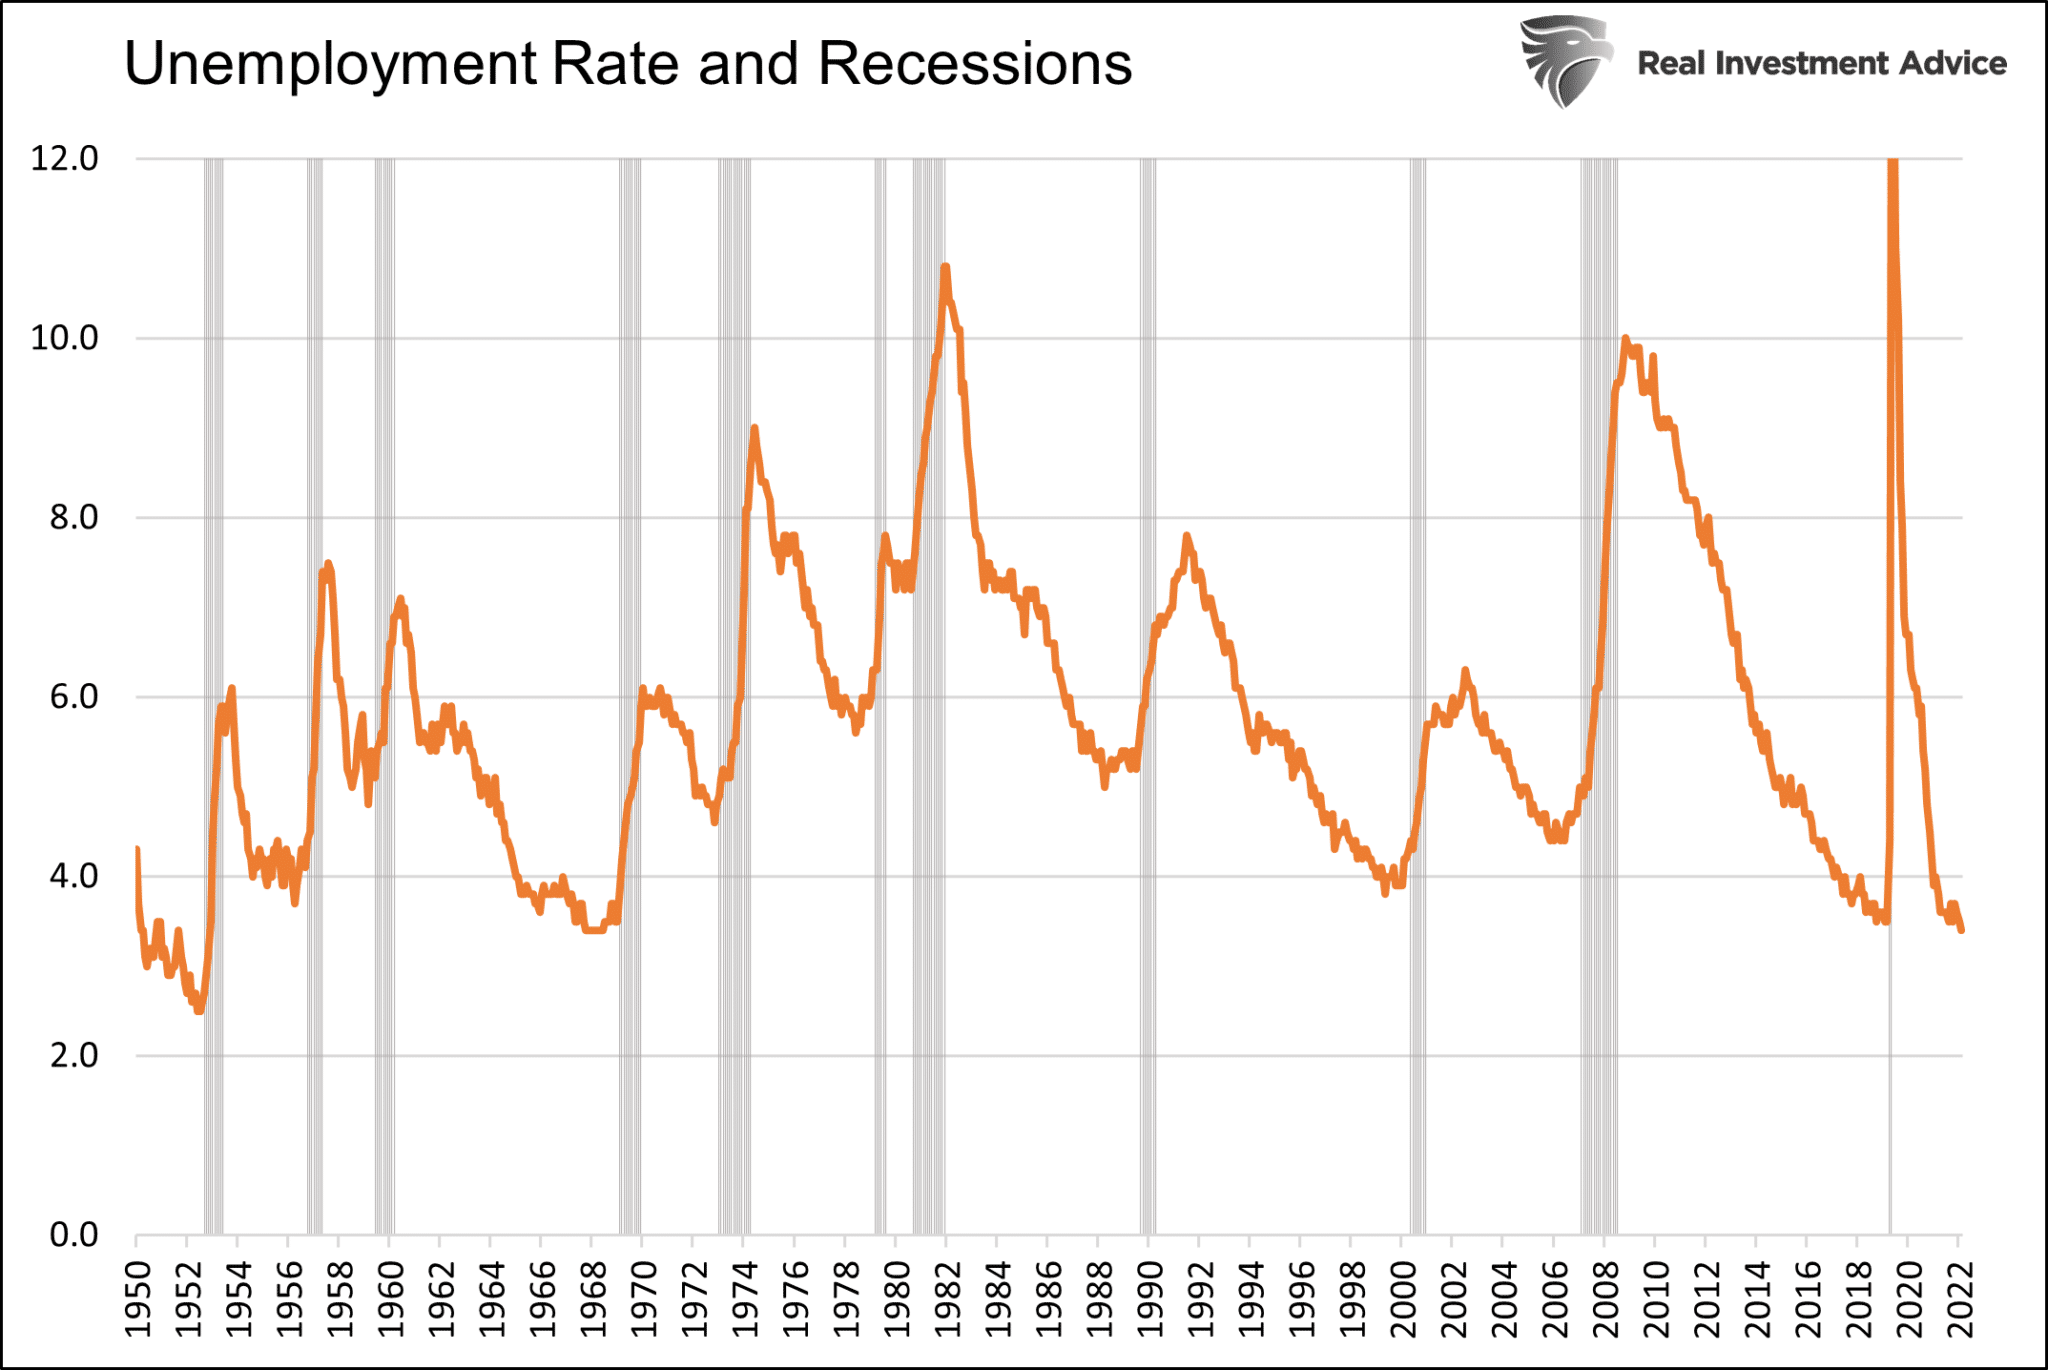 Unemplyoment Rate and Recessions